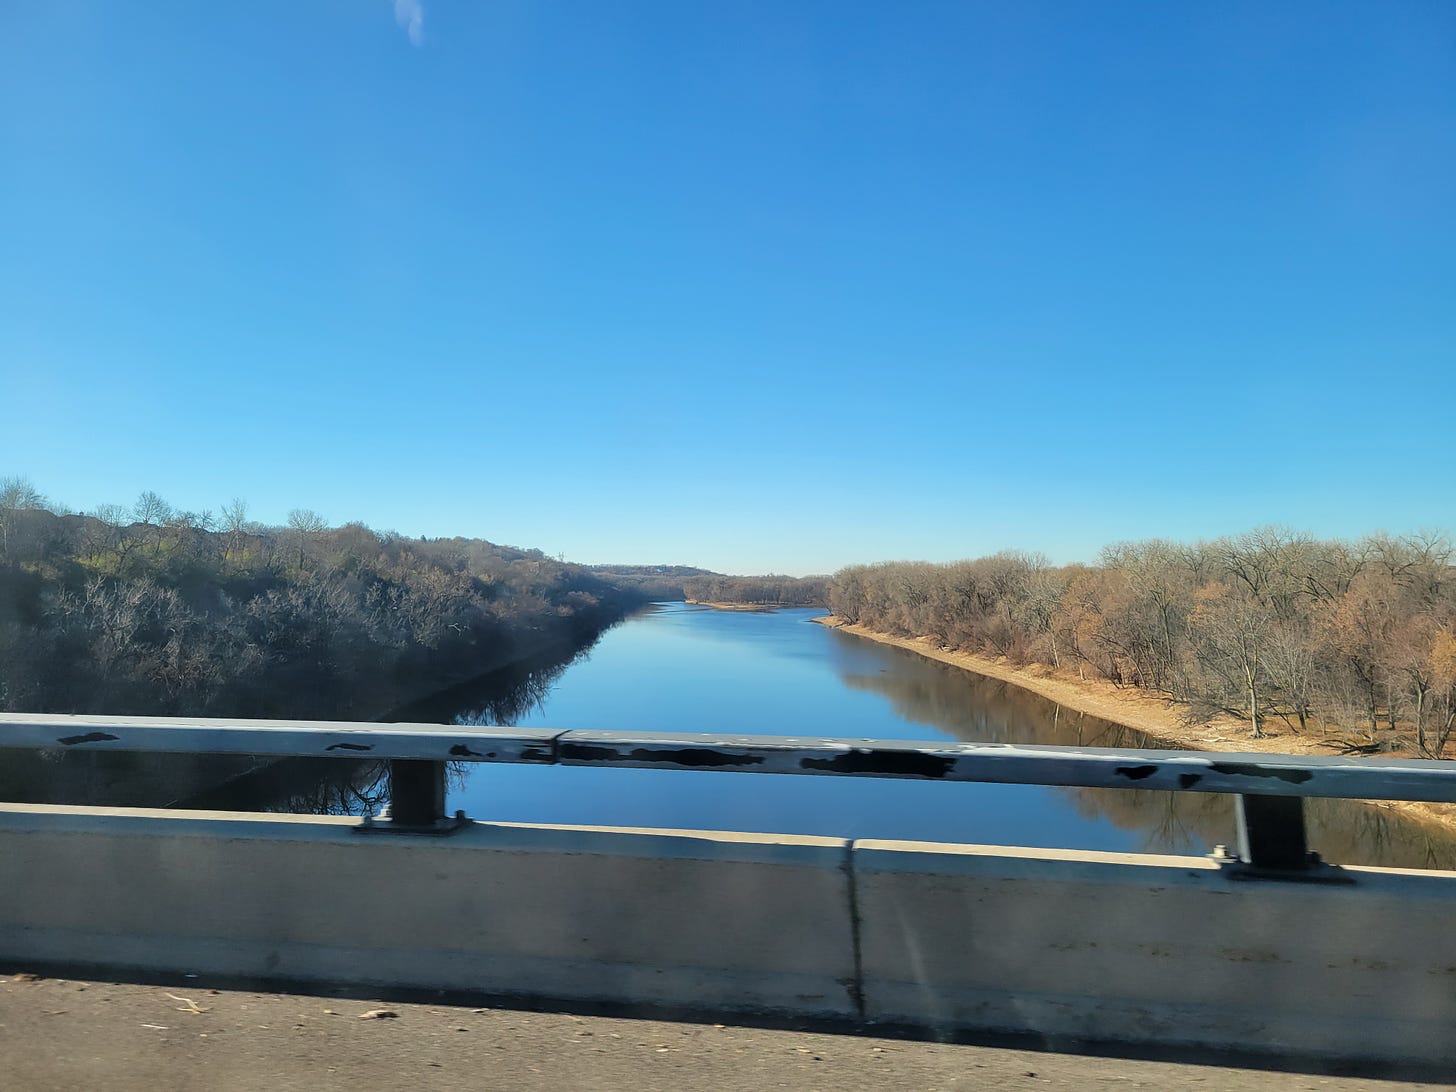 The Mississippi River in St. Paul, MN as seen driving over a bridge. On each sides of the riverbank, there are trees without leaves. The sky is clear and blue. The water is still and reflecting the sky.